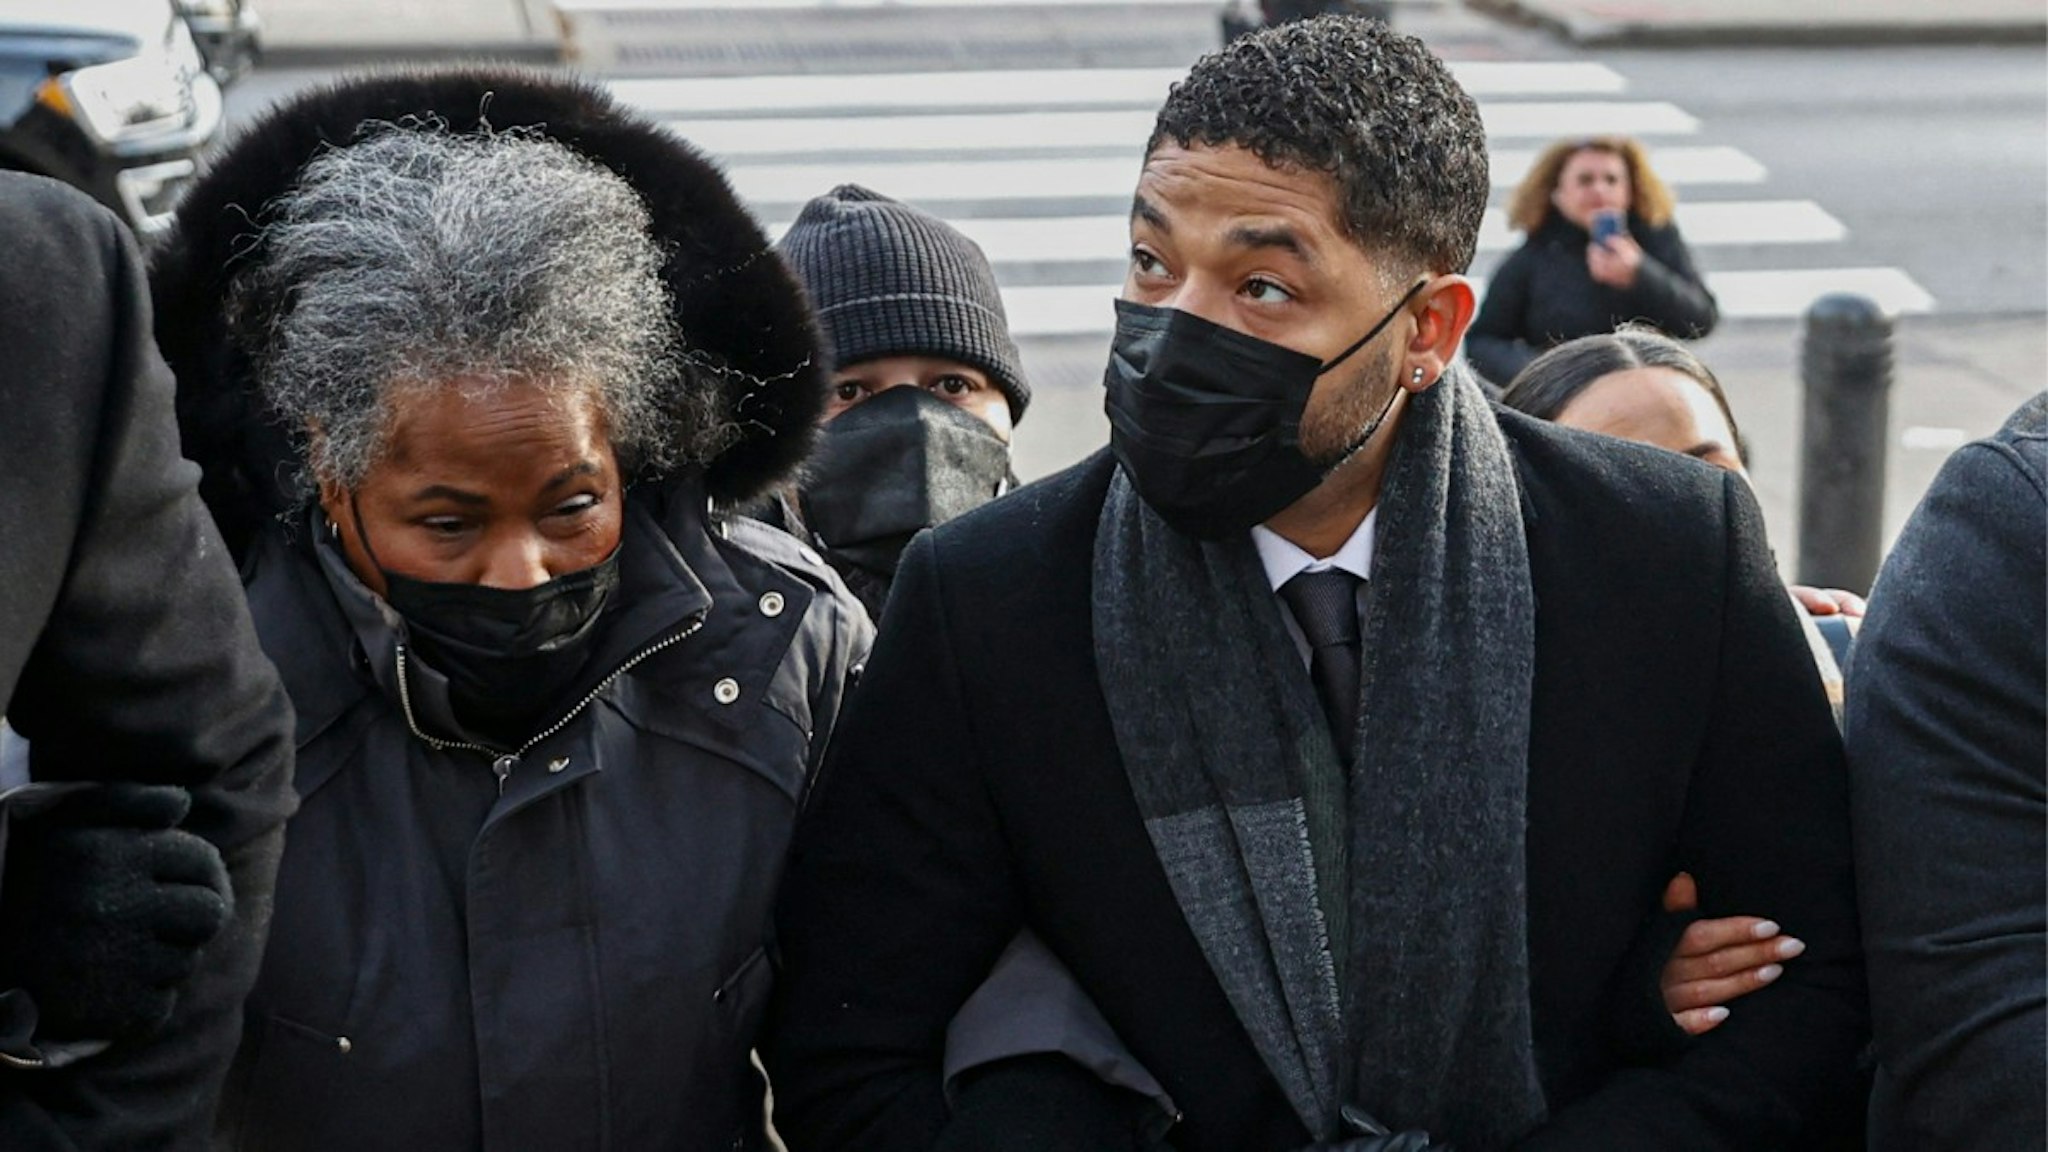 Jussie Smollett arrives with his mother Janet Smollett at the Leighton Criminal Court Building for his trial on disorderly conduct charges on December 7 2021 in Chicago, Illinois. -